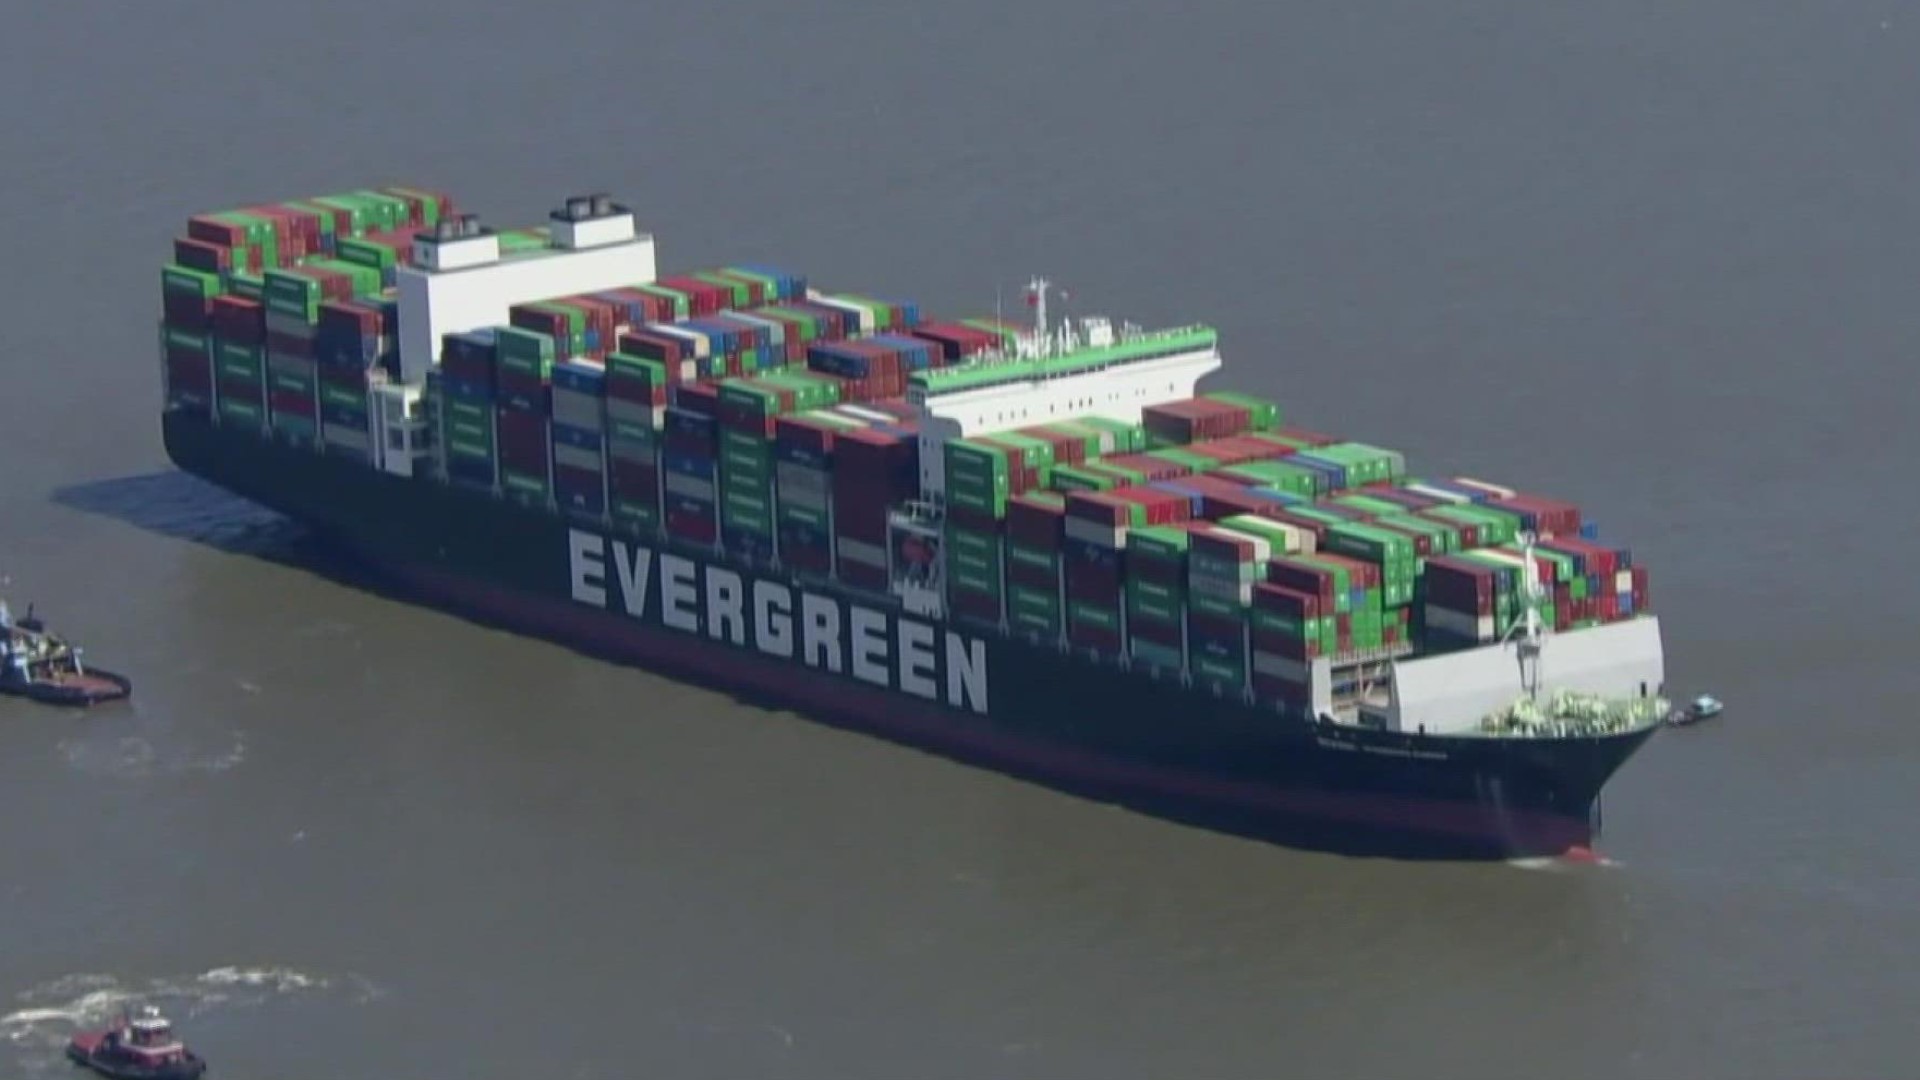 The 1,100-foot cargo ship remains stuck in the Chesapeake Bay following an unsuccessful attempt to free it on Tuesday.